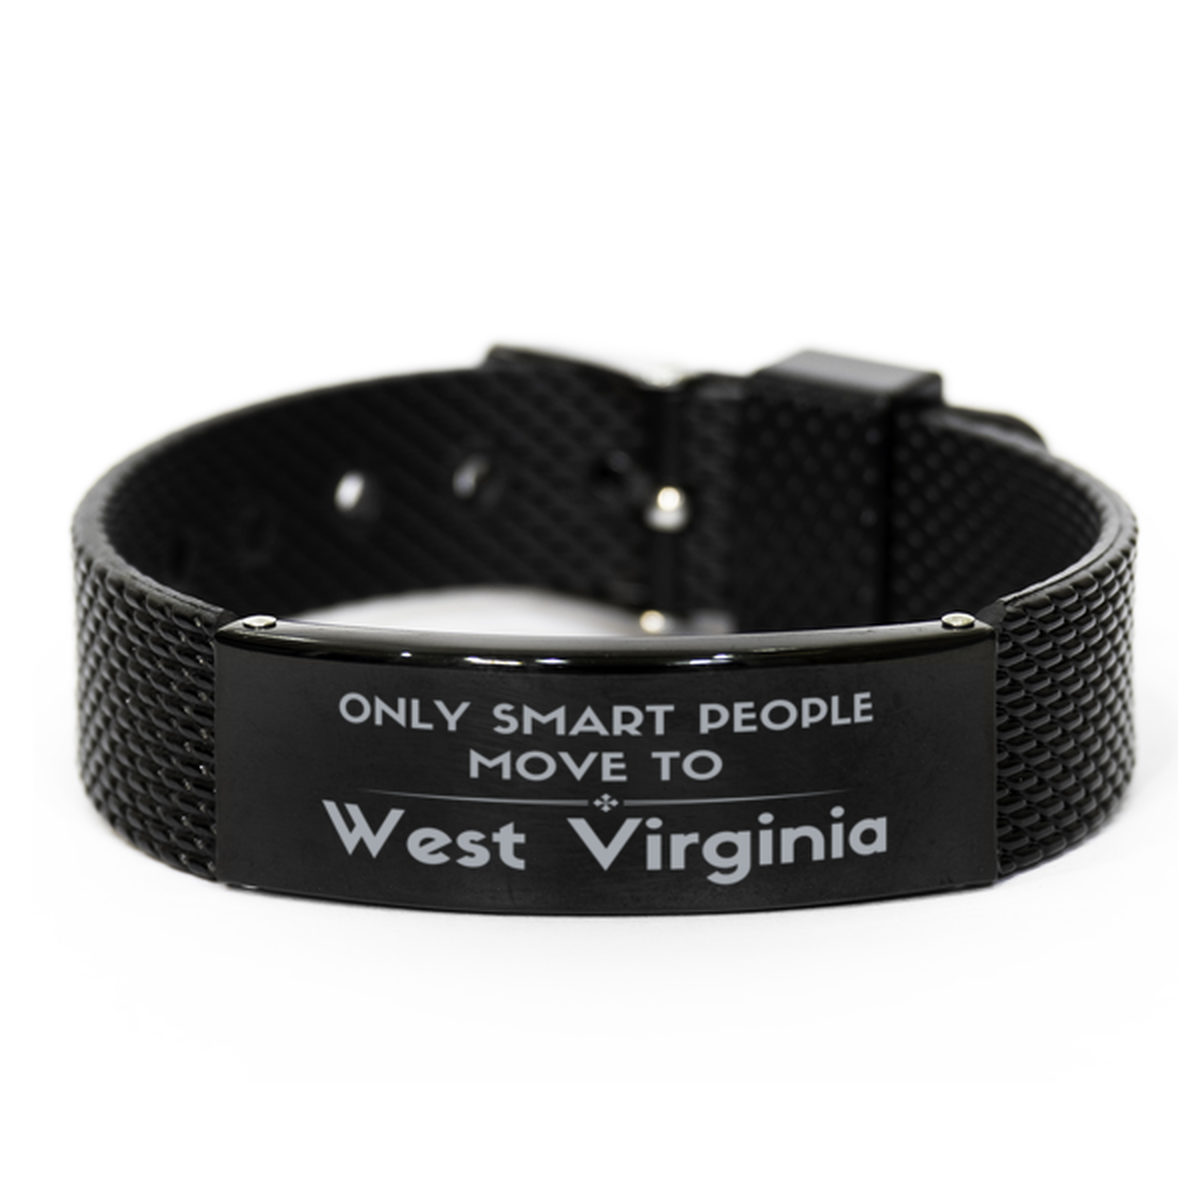 Only smart people move to West Virginia Black Shark Mesh Bracelet, Gag Gifts For West Virginia, Move to West Virginia Gifts for Friends Coworker Funny Saying Quote